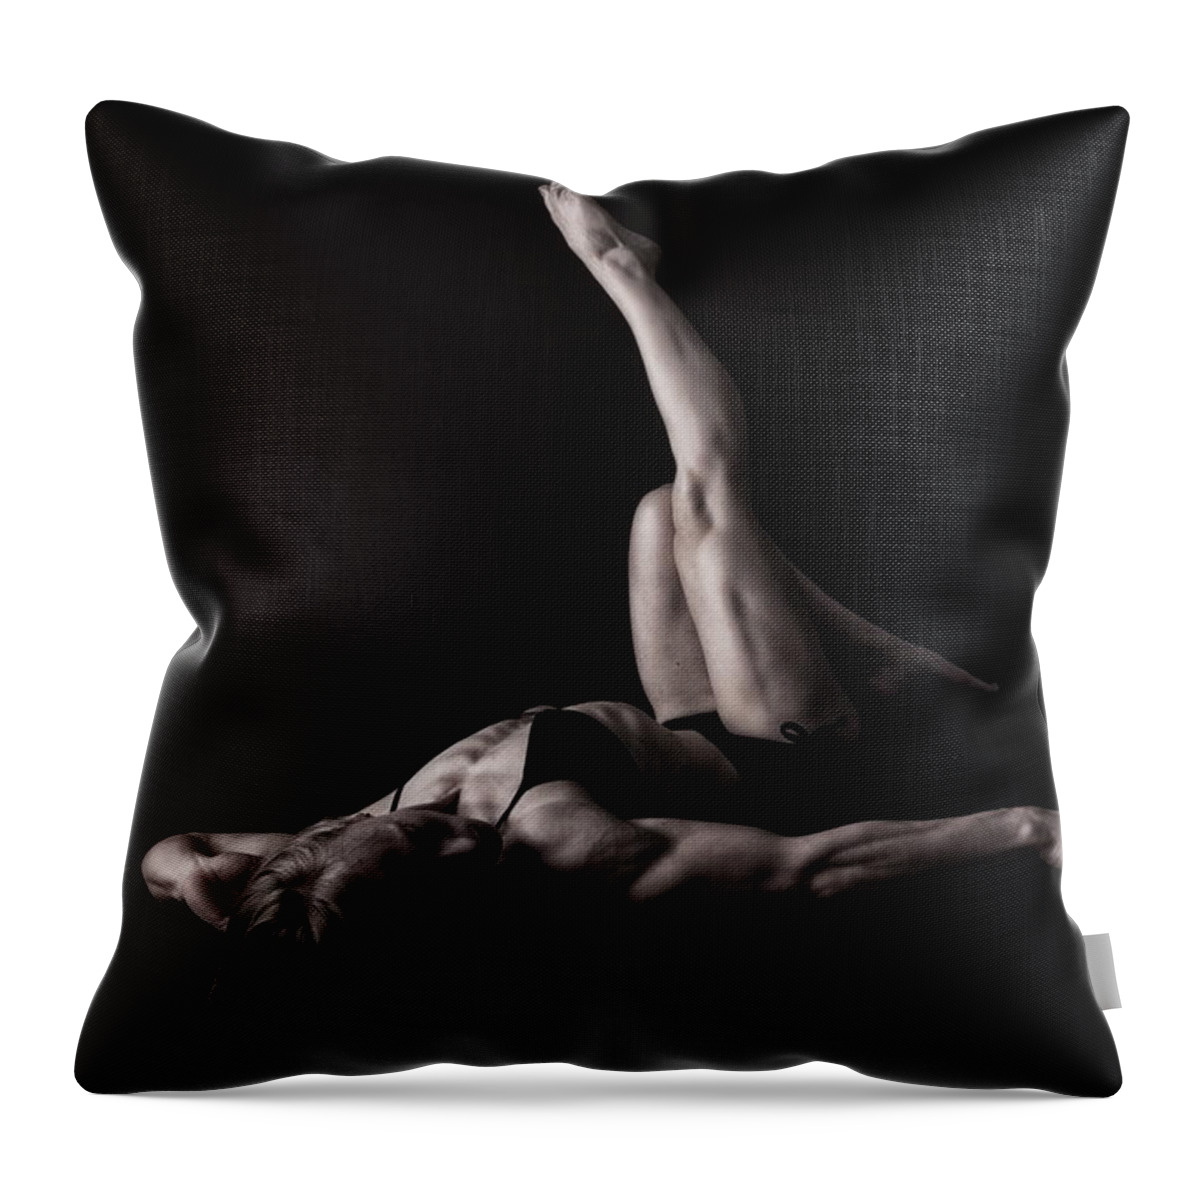 Recline Throw Pillow featuring the photograph Recline in Strength by Monte Arnold